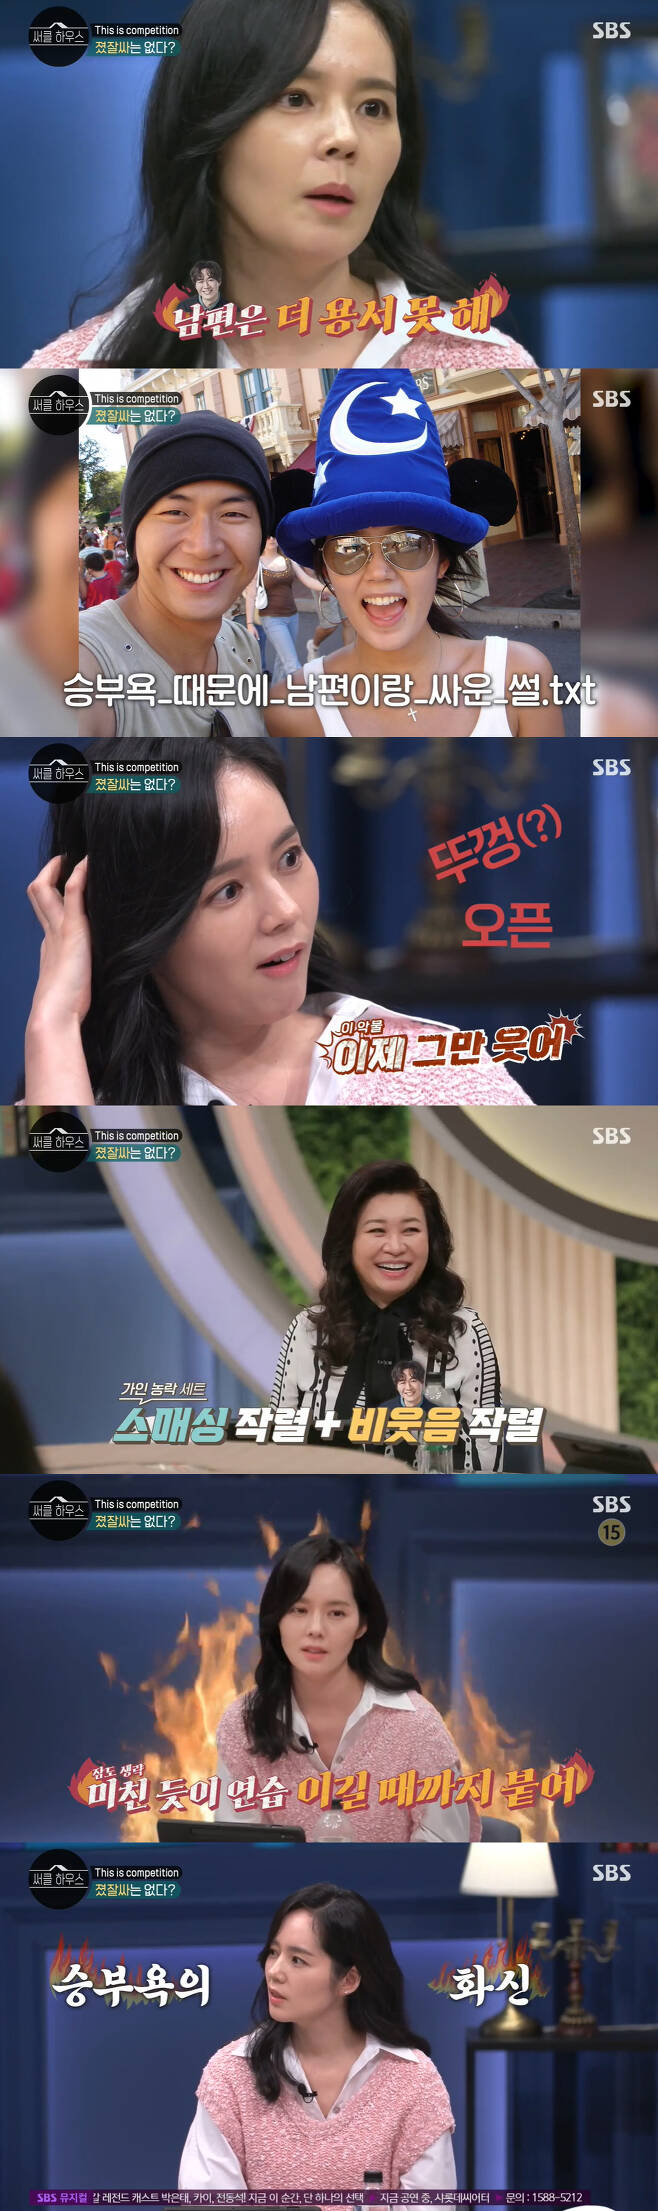 Actor Han Ga-in has revealed his extraordinary desire to win.Circle House, a SBS entertainment program broadcast on the 10th, said, This is competition! There is no good (but we fought well), should we win?The Infinite Competition Society was the theme.Han Ga-in heard the subject and said, When you are six years old, all children are similar, but mothers are already competing with children (at school).My child also says I do well in our neighborhood, but when I go to Daechi-dong, Mother is too late.I think I should do something because I would be late if I heard this sound. The MZ generation is in a highly competitive society, and we have taken the national MZs that have been the hottest competitions, taking this competition every day, Dr. Oh Eun Young said.Short track players Kwak Yoon-gy, Yubin Lee, speed skaters Seung-Hoon Lee and Jung Jae-won, who won the 2020 Beijing Winter Olympics, appeared.Were based on short track, Kwak Yoon-gy said of the occasion when he started YouTube.I made it in the hope that the athletes who participated in the Olympics would be noticed. The eldest brother, Seung-Hoon Lee, said this was his fourth Olympic Games, saying, The Olympics feel like a domestic tournament.Yubin Lee recalled the womens relay final Kyonggi, who won the silver medal, Kyonggi was reminded that I thought, I will be today?The female relay was suddenly replaced, so the male players thought that the medal could be difficult, but I did very well, said Kwak Yoon-gy.I feel like Im being forced to endure my life as a national representative, Yubin Lee said, calmly, saying, Im not allowed to go out and stay in the athletic village.Oh Eun Young looked at Yubin Lee and Jung Jae Won in 2001 with a warm eye and said, It looks very hard when you are on the link wearing national uniform.I am so cute to see you wearing plain clothes, he said. I was a young age and asked how to endure the burden.Jung Jae-won said, Im good (but I fought well) means I lost anyway.The process is important, but the result seems important for the player because if he misses (the medal), he has to wait four years (the Olympics). Im not fighting to lose, I think theres a compensation mind to myself (who wants to win a medal) because of the pain and effort thats been going on, Yubin Lee agreed.I hate the word lost; I have a huge desire to win, so strong I avoid winning, Han Ga-in said, unexpectedly.I hate betting, and exercising Kyonggi. I never play golf. I do exercise alone, such as yoga and Pilates, he said.When asked if he did not exercise with his husband Yeon Jung-hoon, Noh Hong-chul said, My husband is no more forgiving.My husband kept smacking and laughing. Even though it was a honeymoon, the lid was open and I said, Stop laughing. I put down the table tennis and went up to the hostel. I played a game called Teamkwon when I was newly married, but I did not do well, but my husband was good. I kept laughing and I practiced like crazy at dawn and gamed it until I won.This psychology was evident while working as an actor; Han Ga-in said, There are actors who come in similar roles at similar ages.They dont think Im a competitor, but when I see that actor, I think Im a competitor.I got married quickly because I didnt want to rank myself in Kyonggi because I hate competition so much, he said. Again, I hated competing.Its so hard to accept losing, Dr. Oh told Han Ga-in, I think he wants to do too well and is a hard worker. If its not 100, hes choosing 0.I do not want to be embarrassed because I can not do it properly. There is a defense mechanism. Han Ga-in also said, When I was in Han Ga-in, I saw a bad word in my article, When I went in and lived.I thought about why I felt bad that evening and I thought, Oh, I got a bad one in the morning. He ruled me for a long time. Oh said, The evil leaves a wound in my heart.No matter how hard you are, you will be left with afterimages. Those who are told not to look at them are those who are empowered by the Sunfle.Criticism is different, but criticism is insulting. 